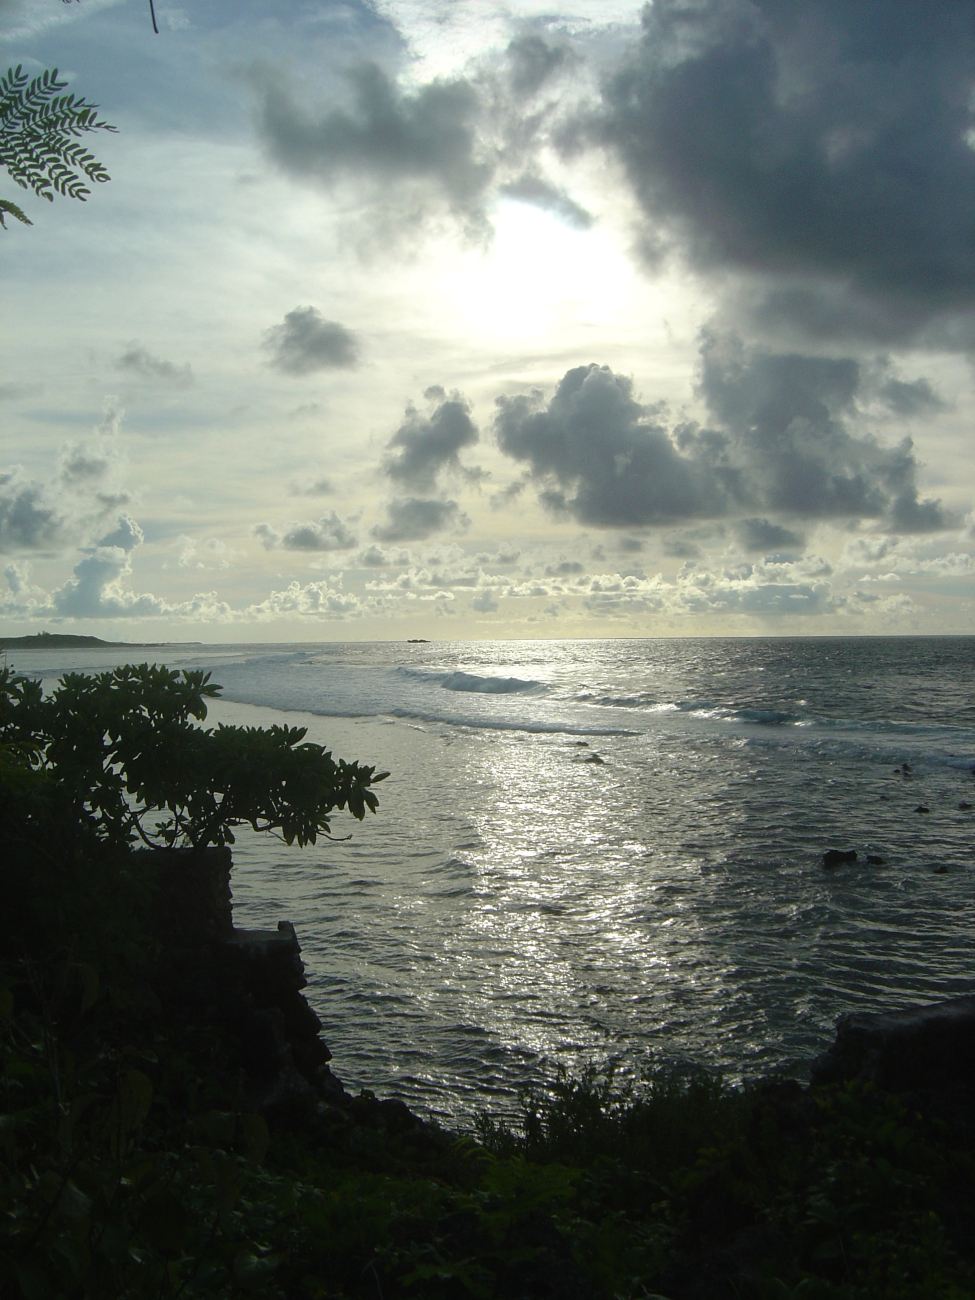 Sunshine playing off the surf in the late afternoon on the Guam coastline